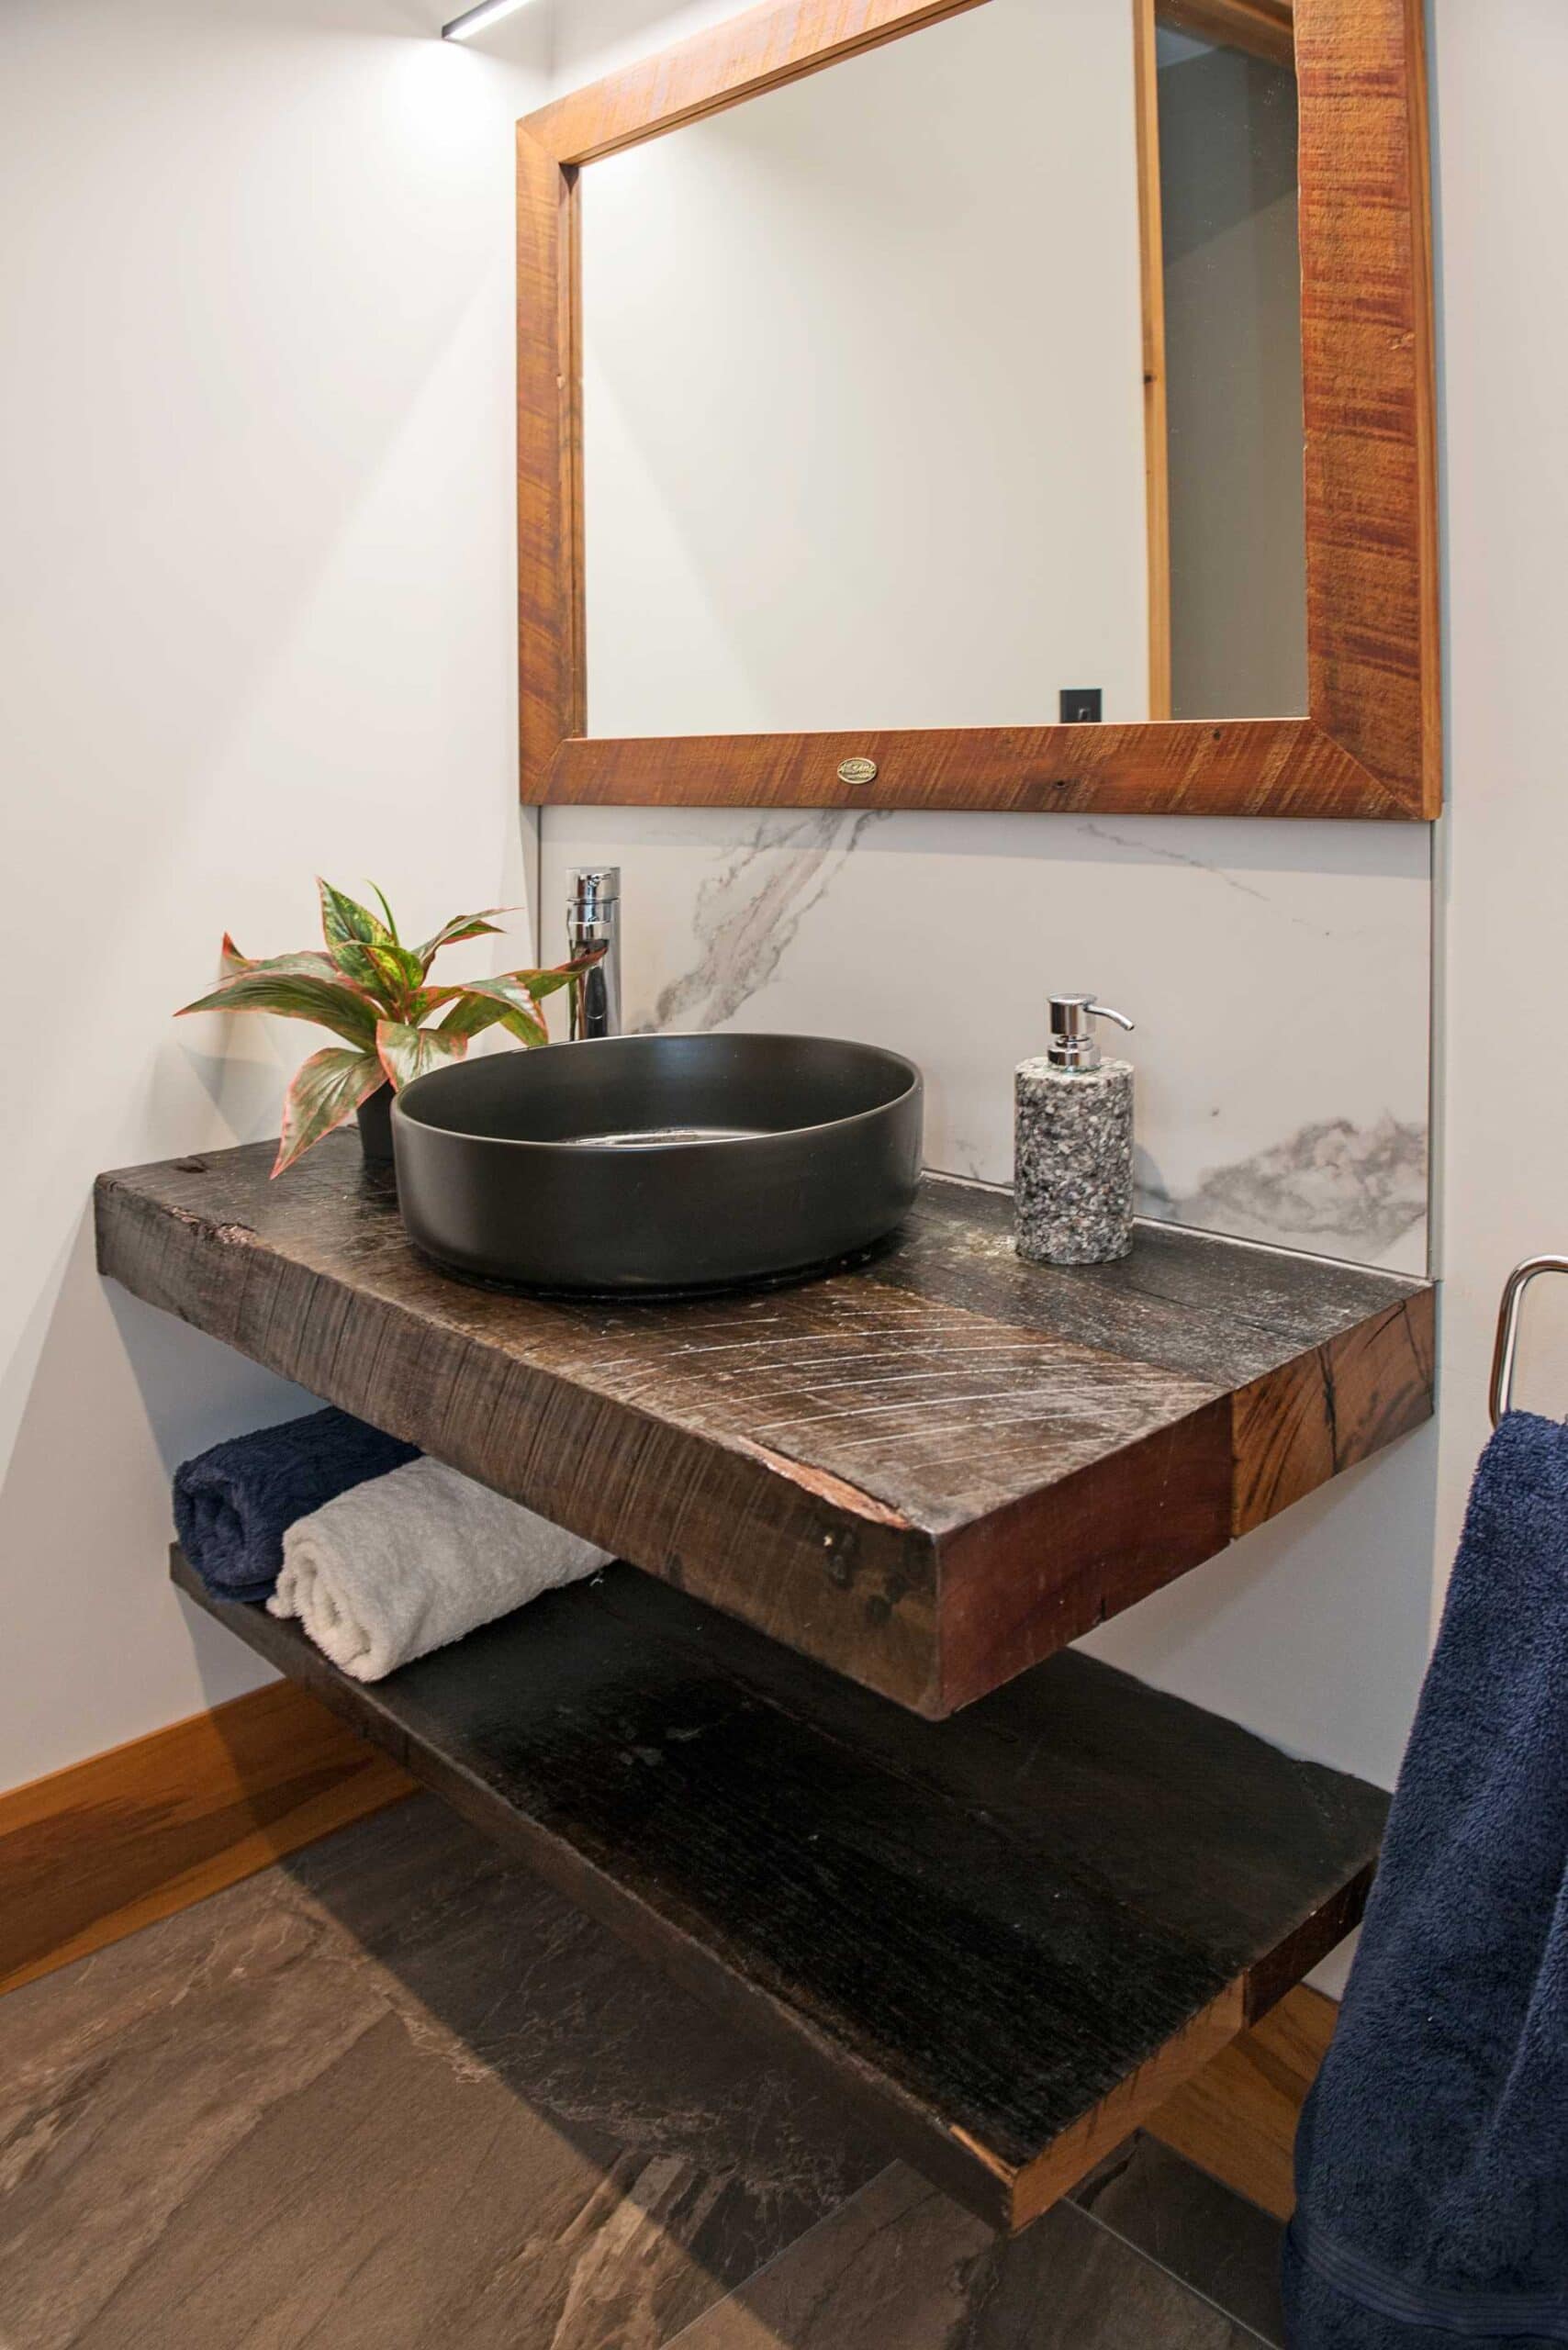  Guest bathroom vanity made with recycled railway sleepers